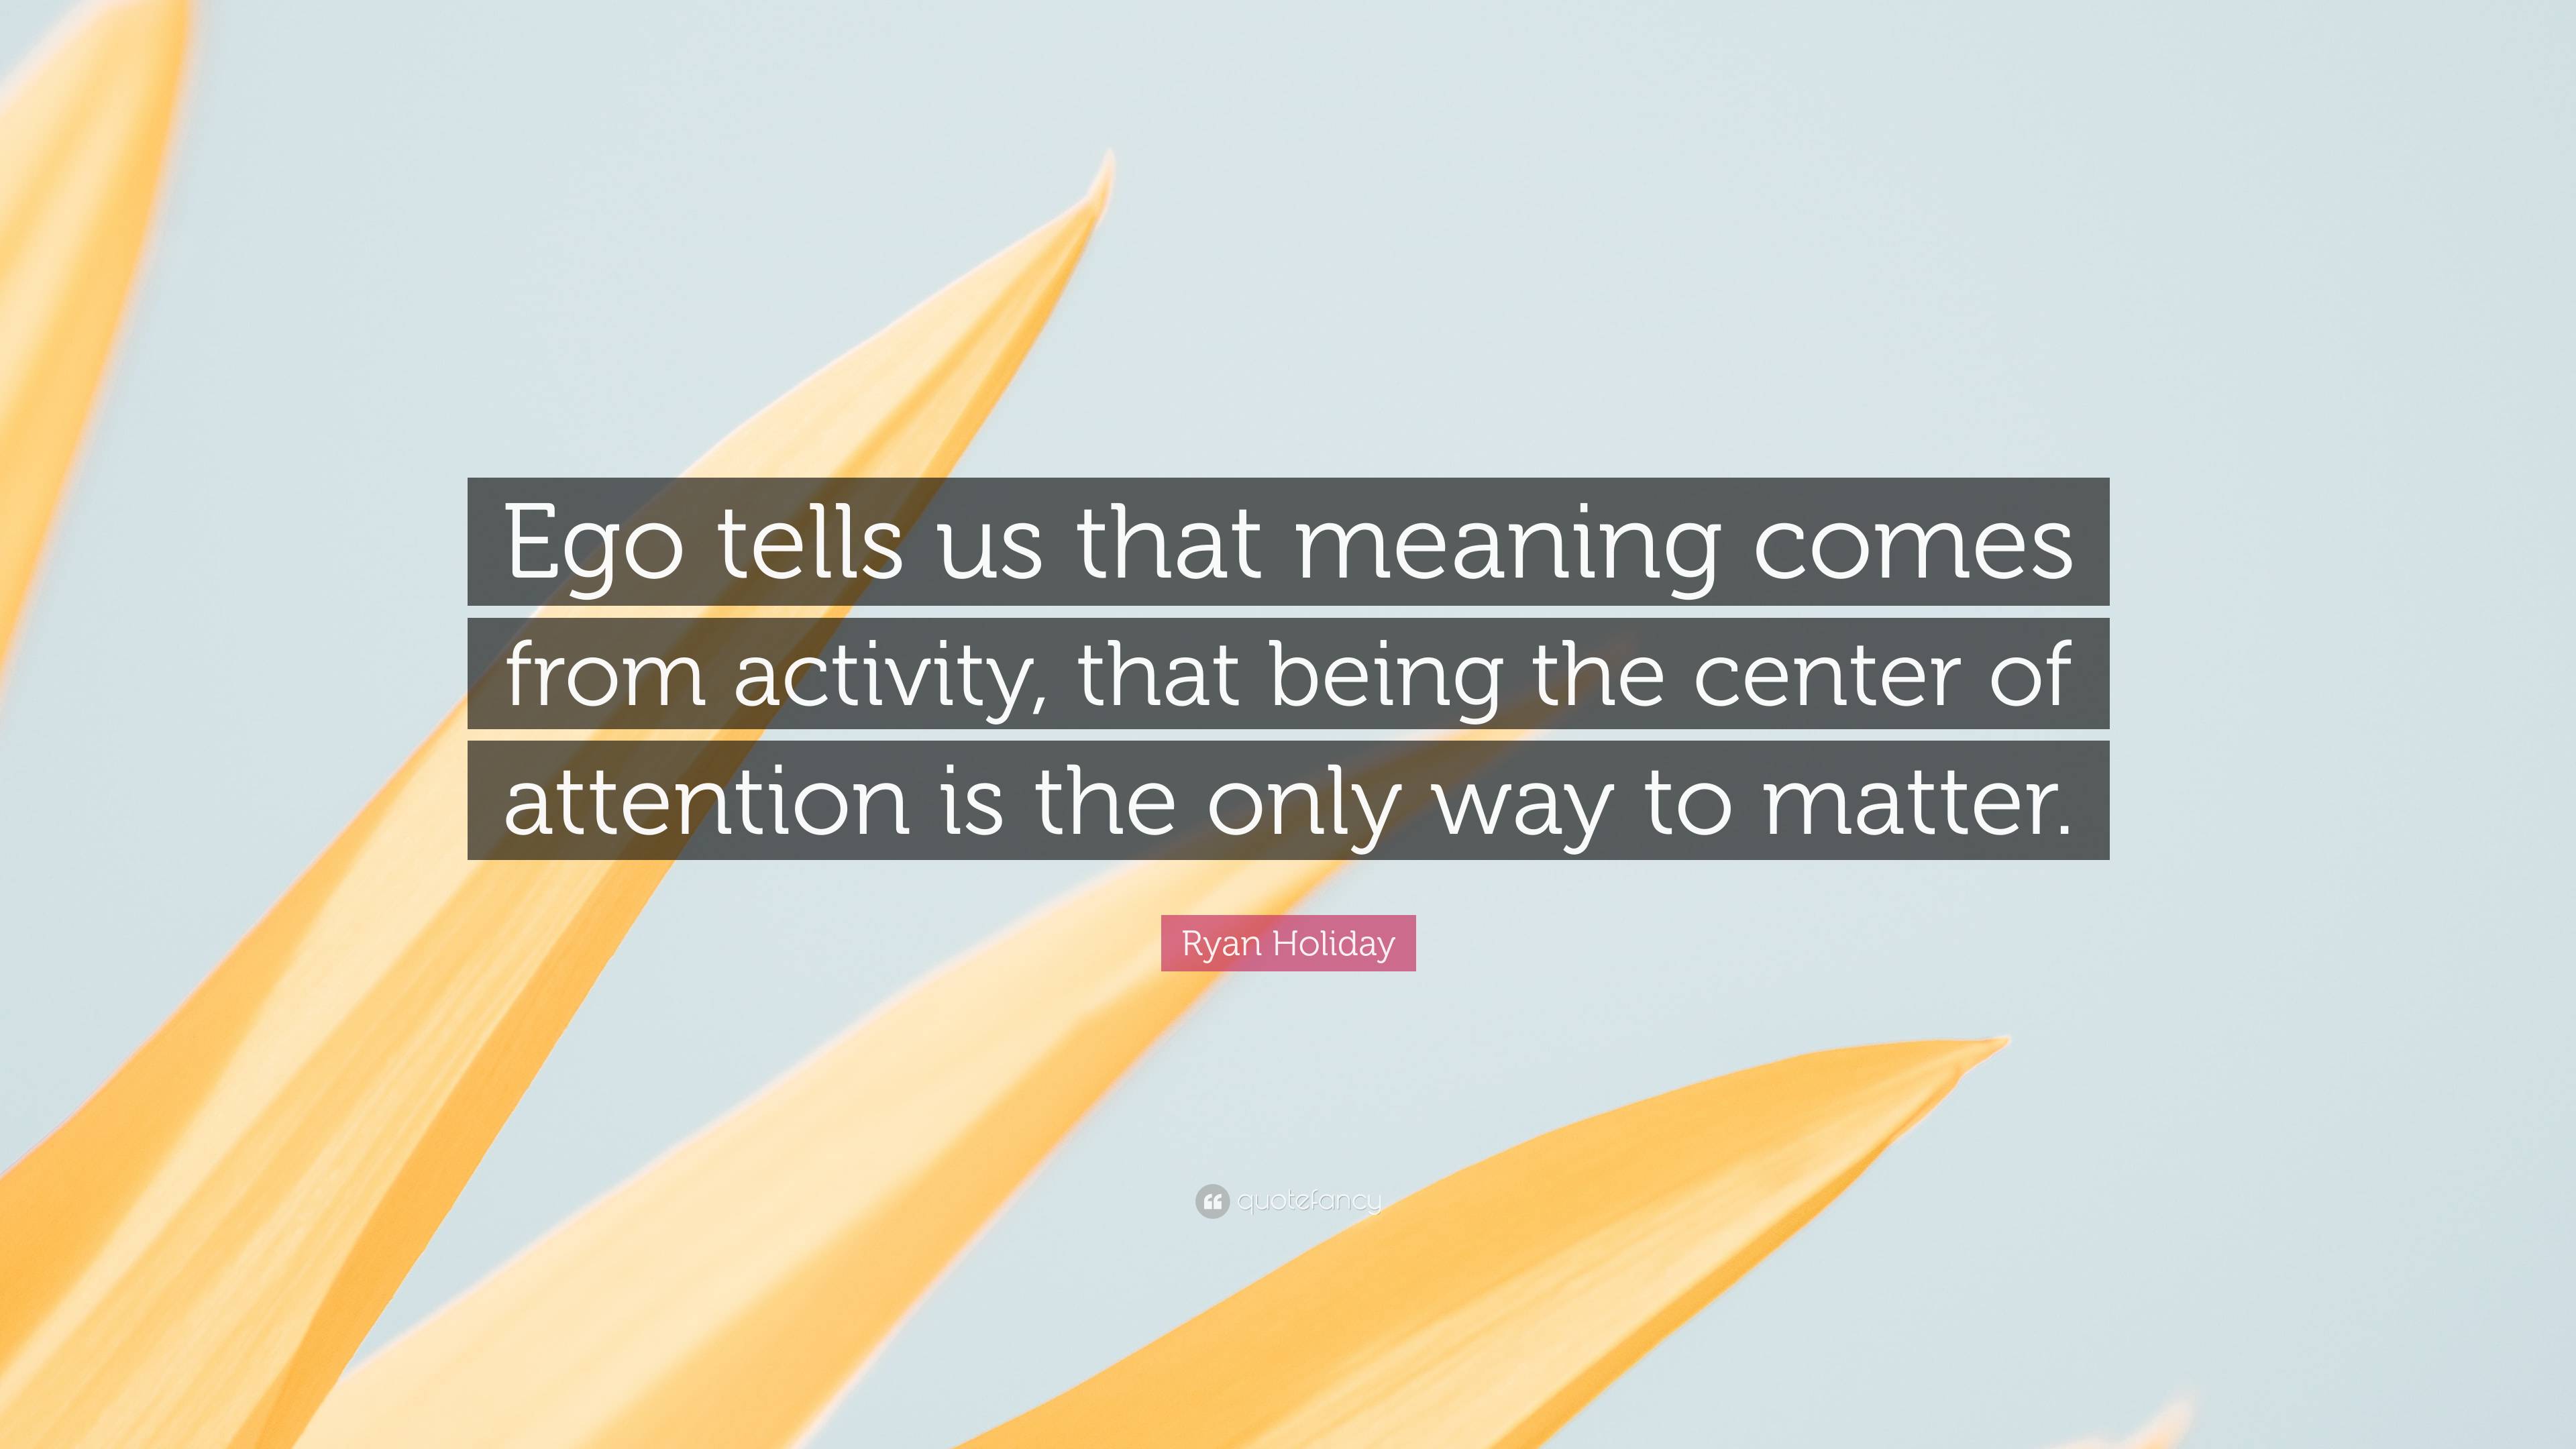 Ryan Holiday Quote: “Ego tells us that meaning comes from activity